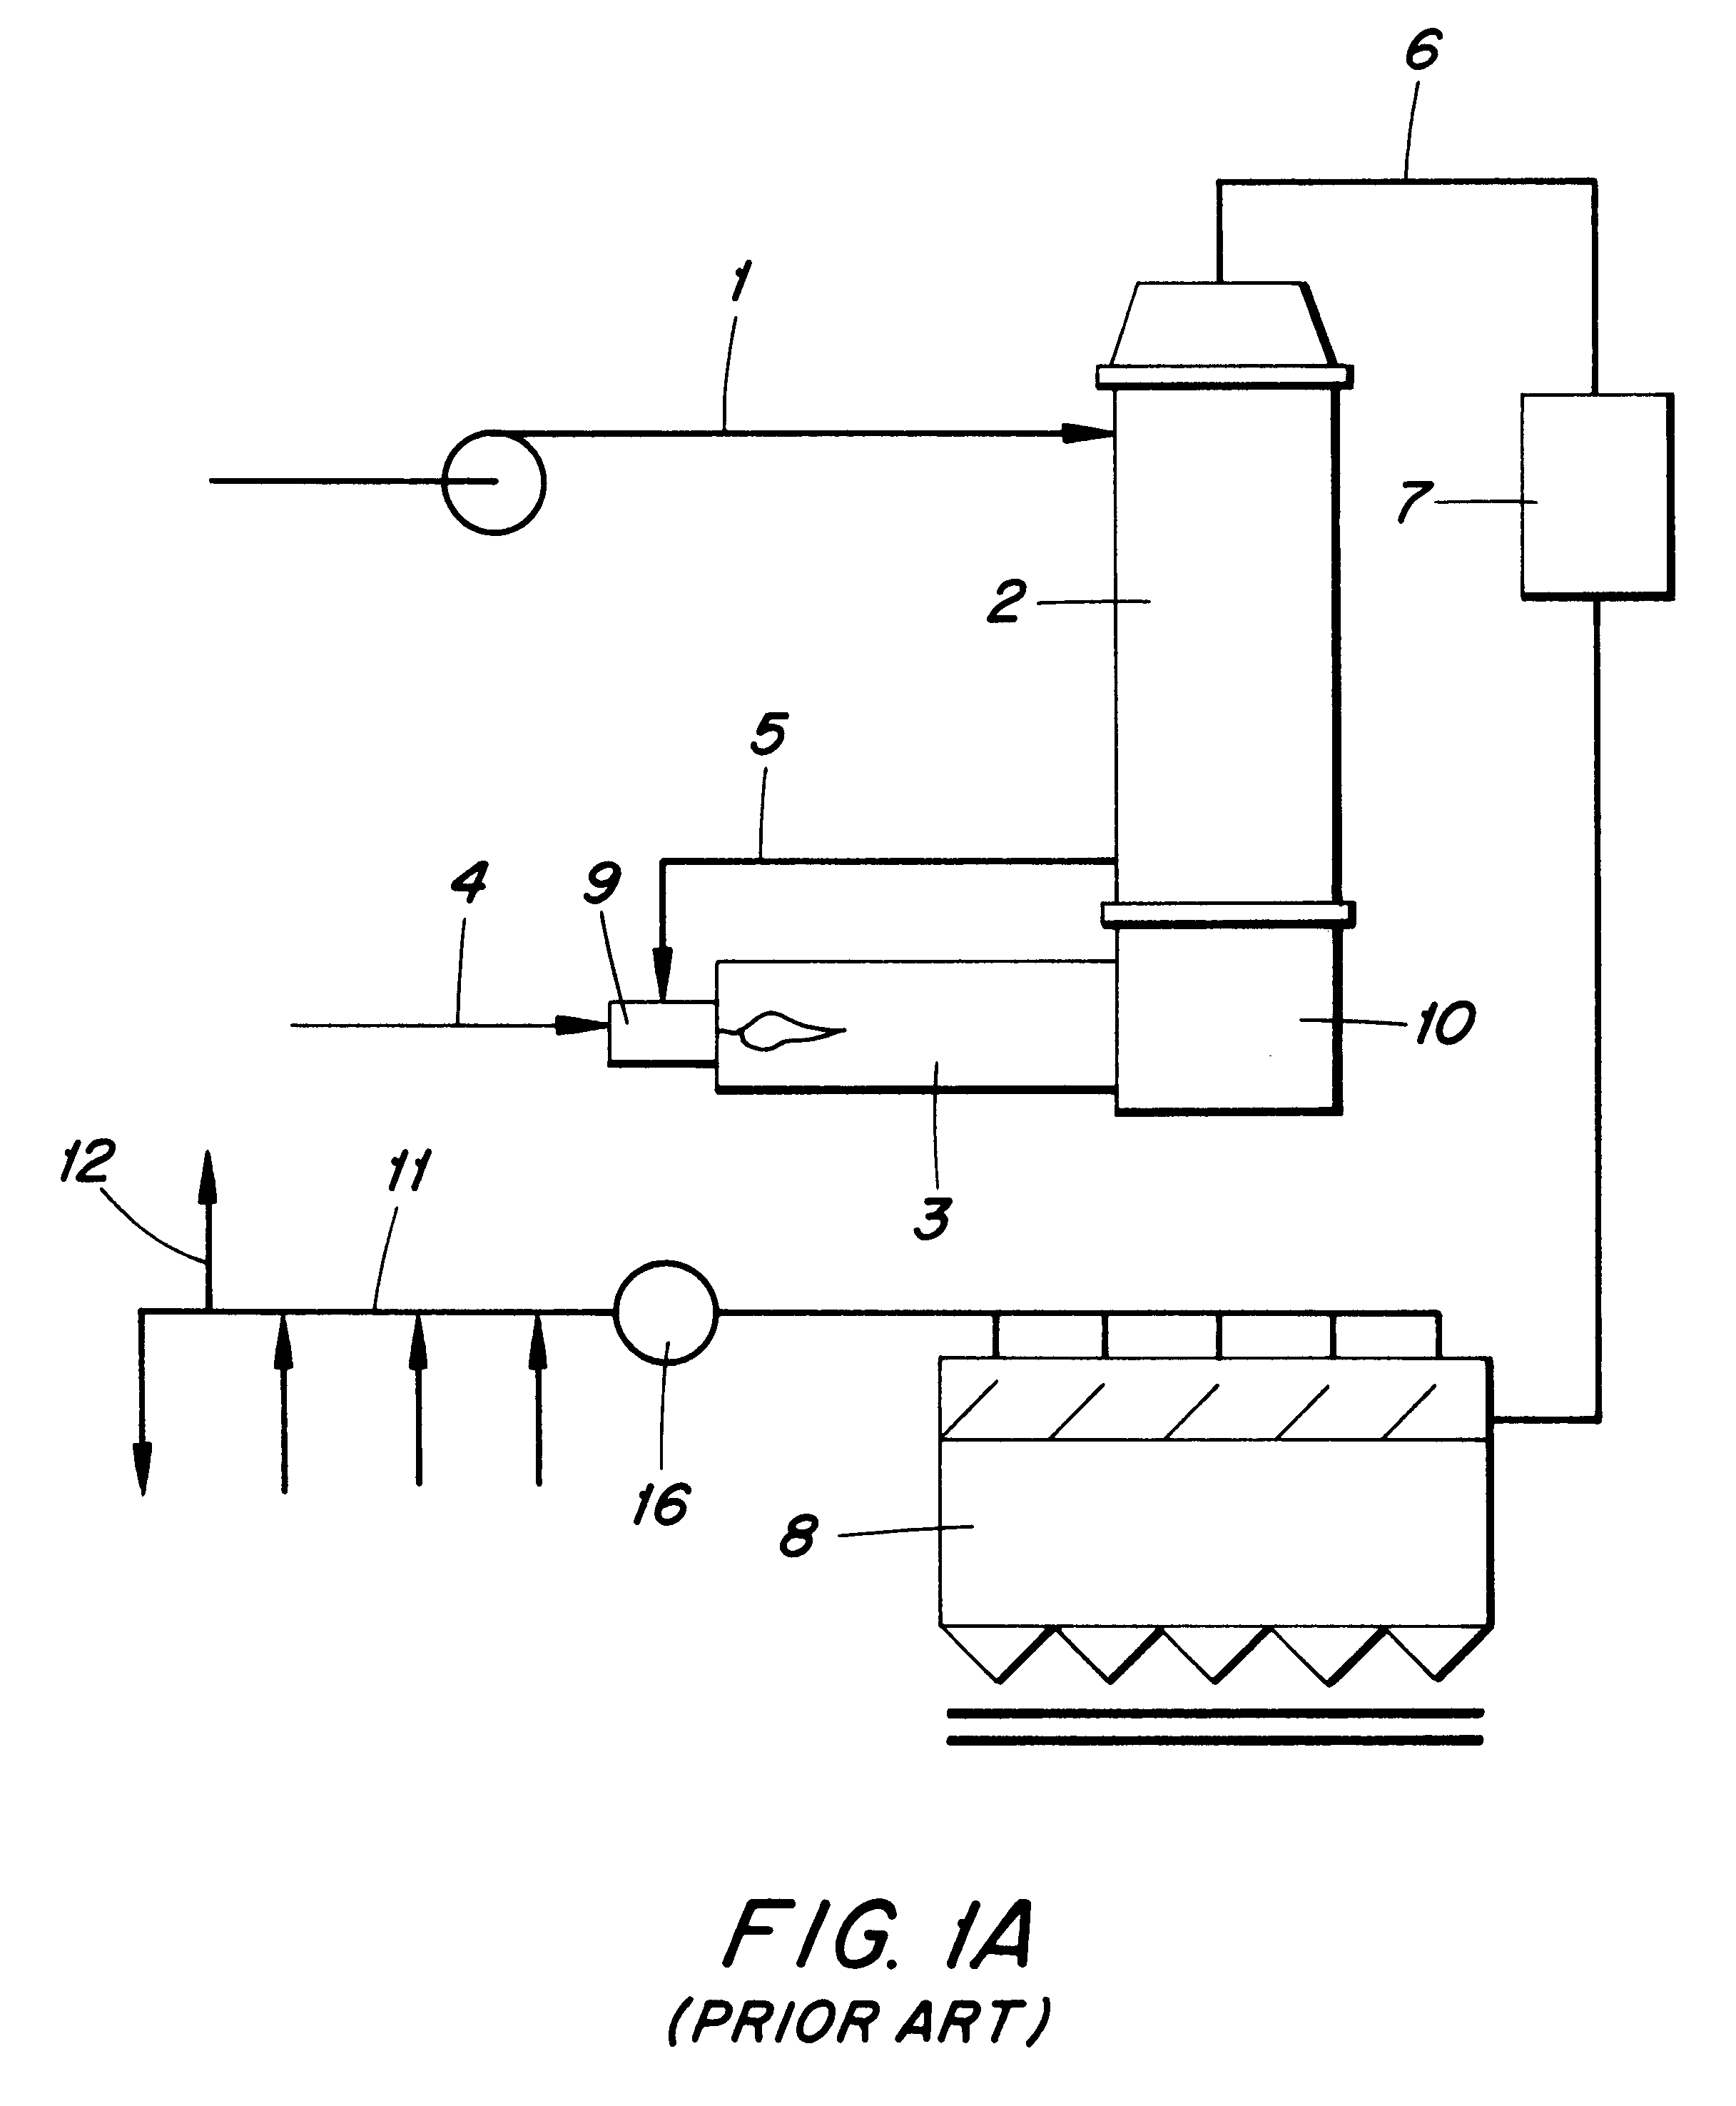 Heat exchanger with tubes suspended into a lower end plate allowing thermal movement of the tubes